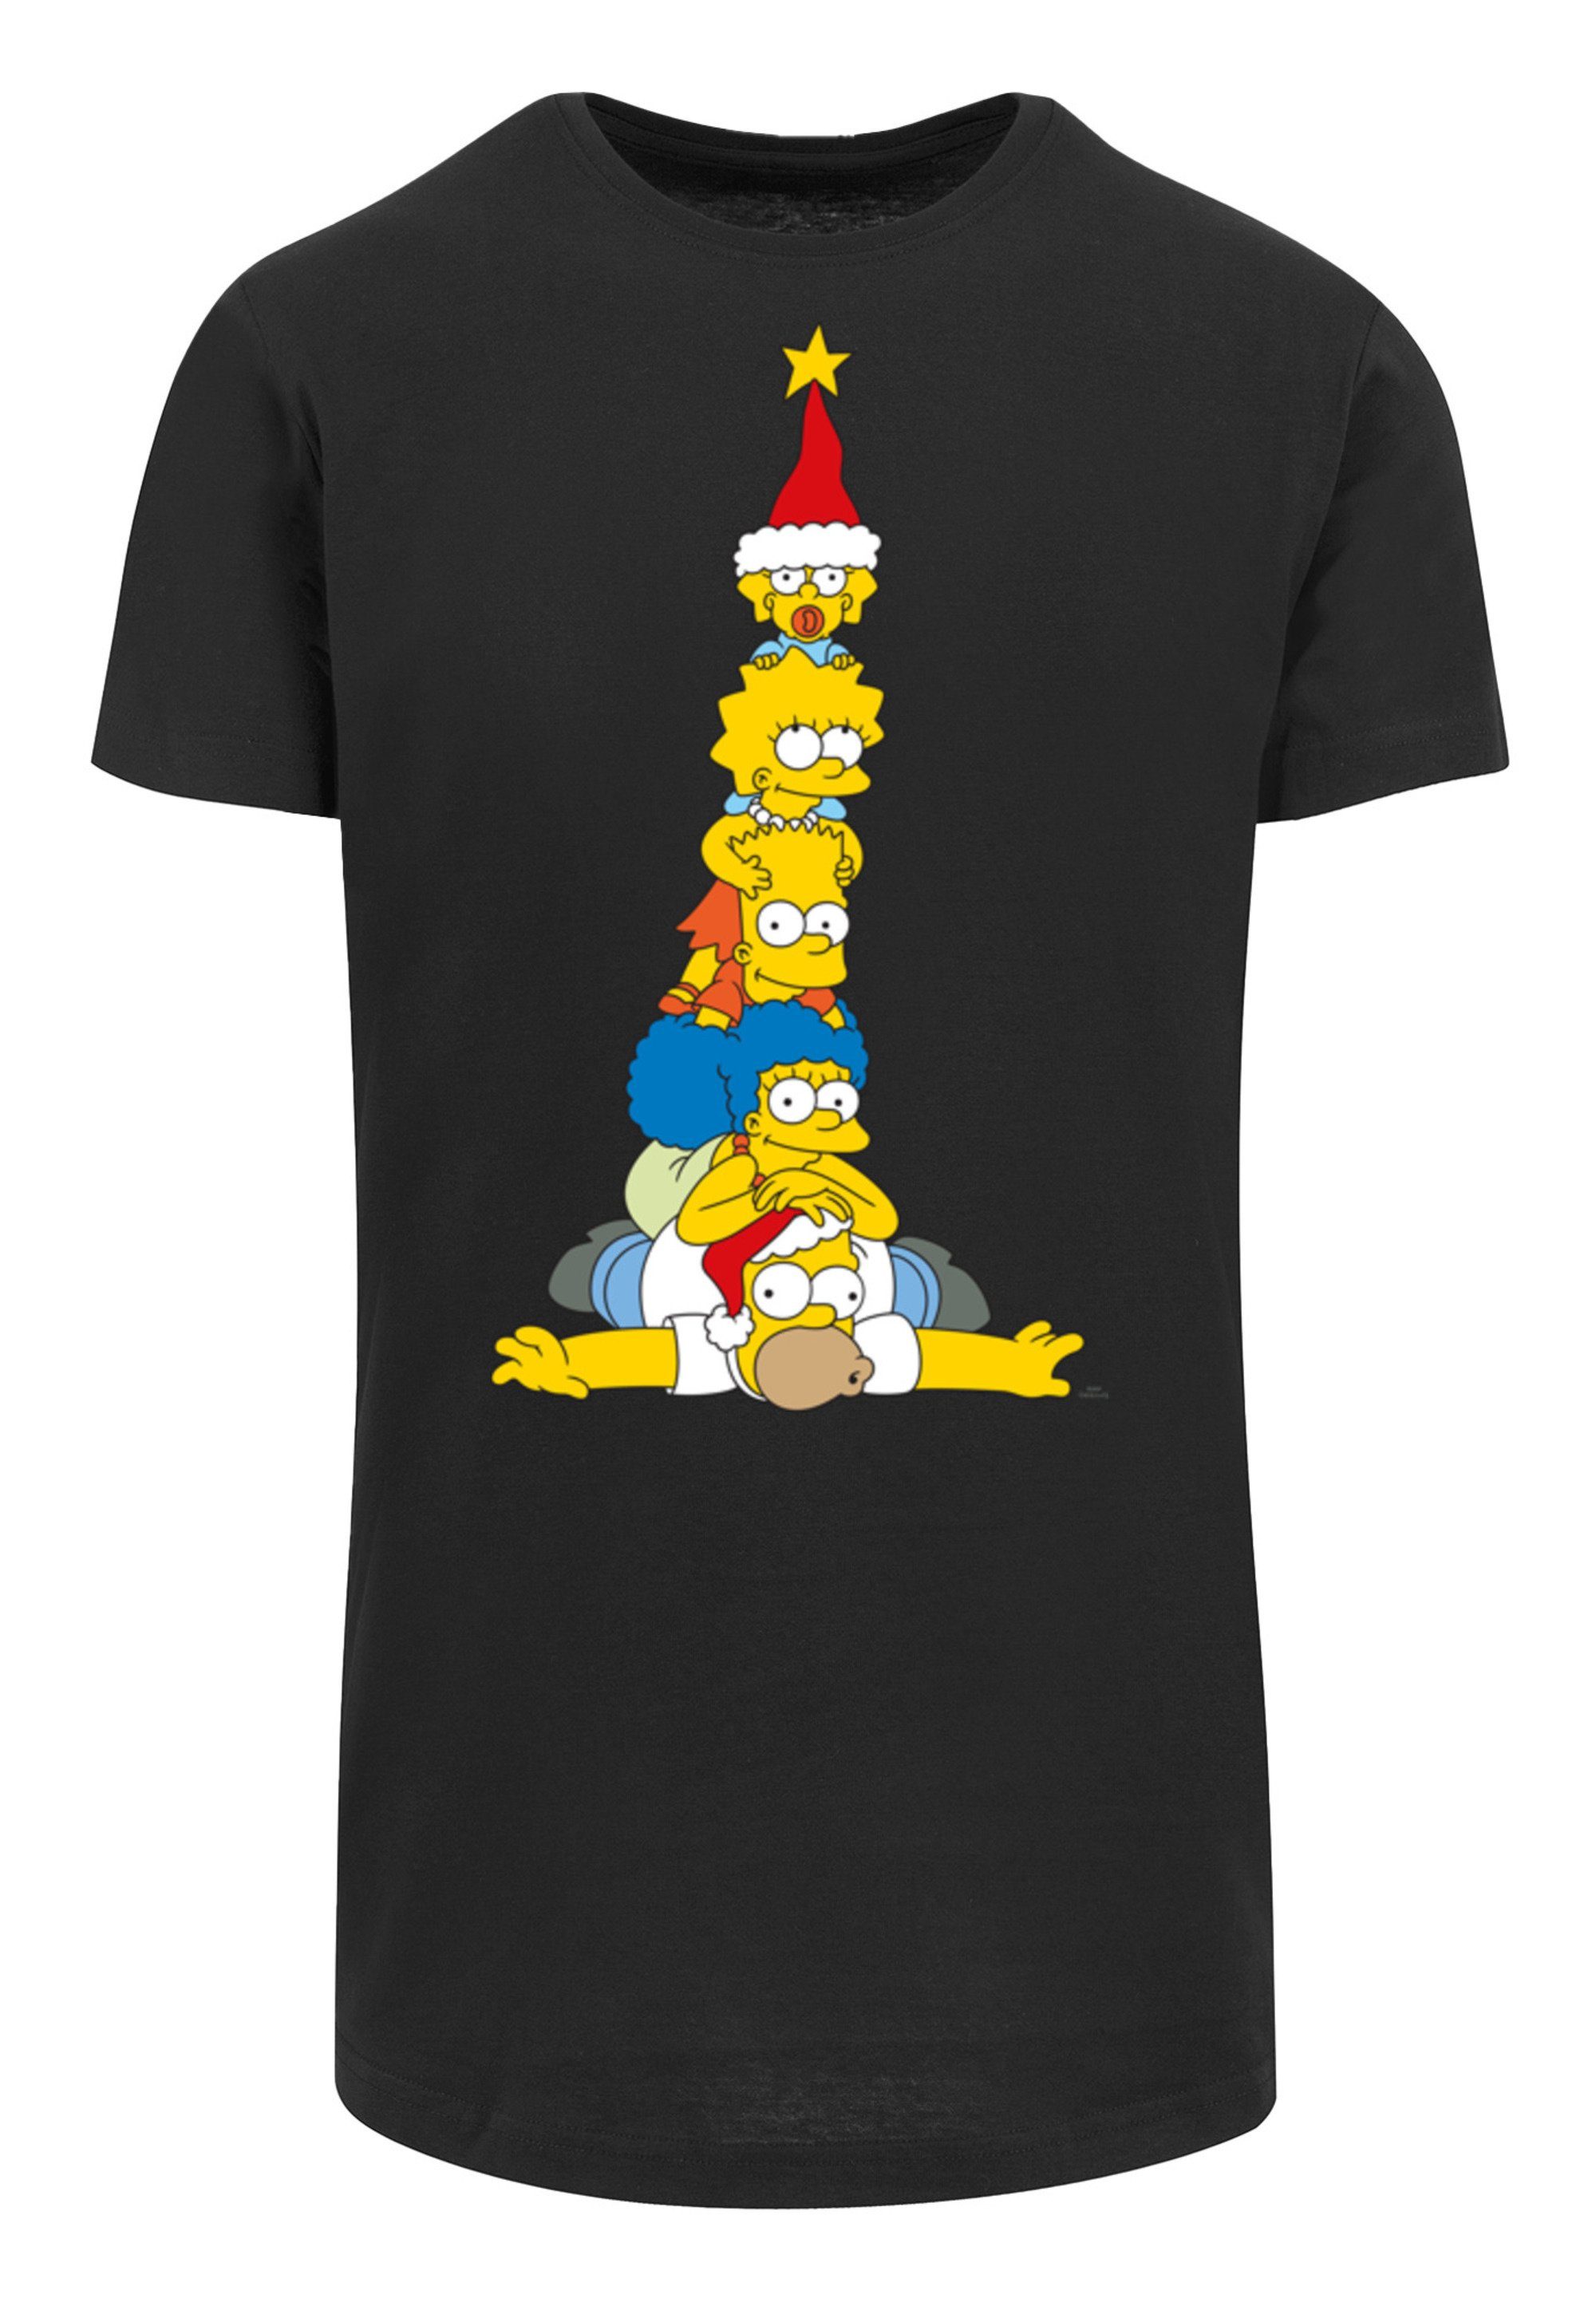 F4NT4STIC T-Shirt The Weihnachtsbaum Christmas Print Family schwarz Simpsons